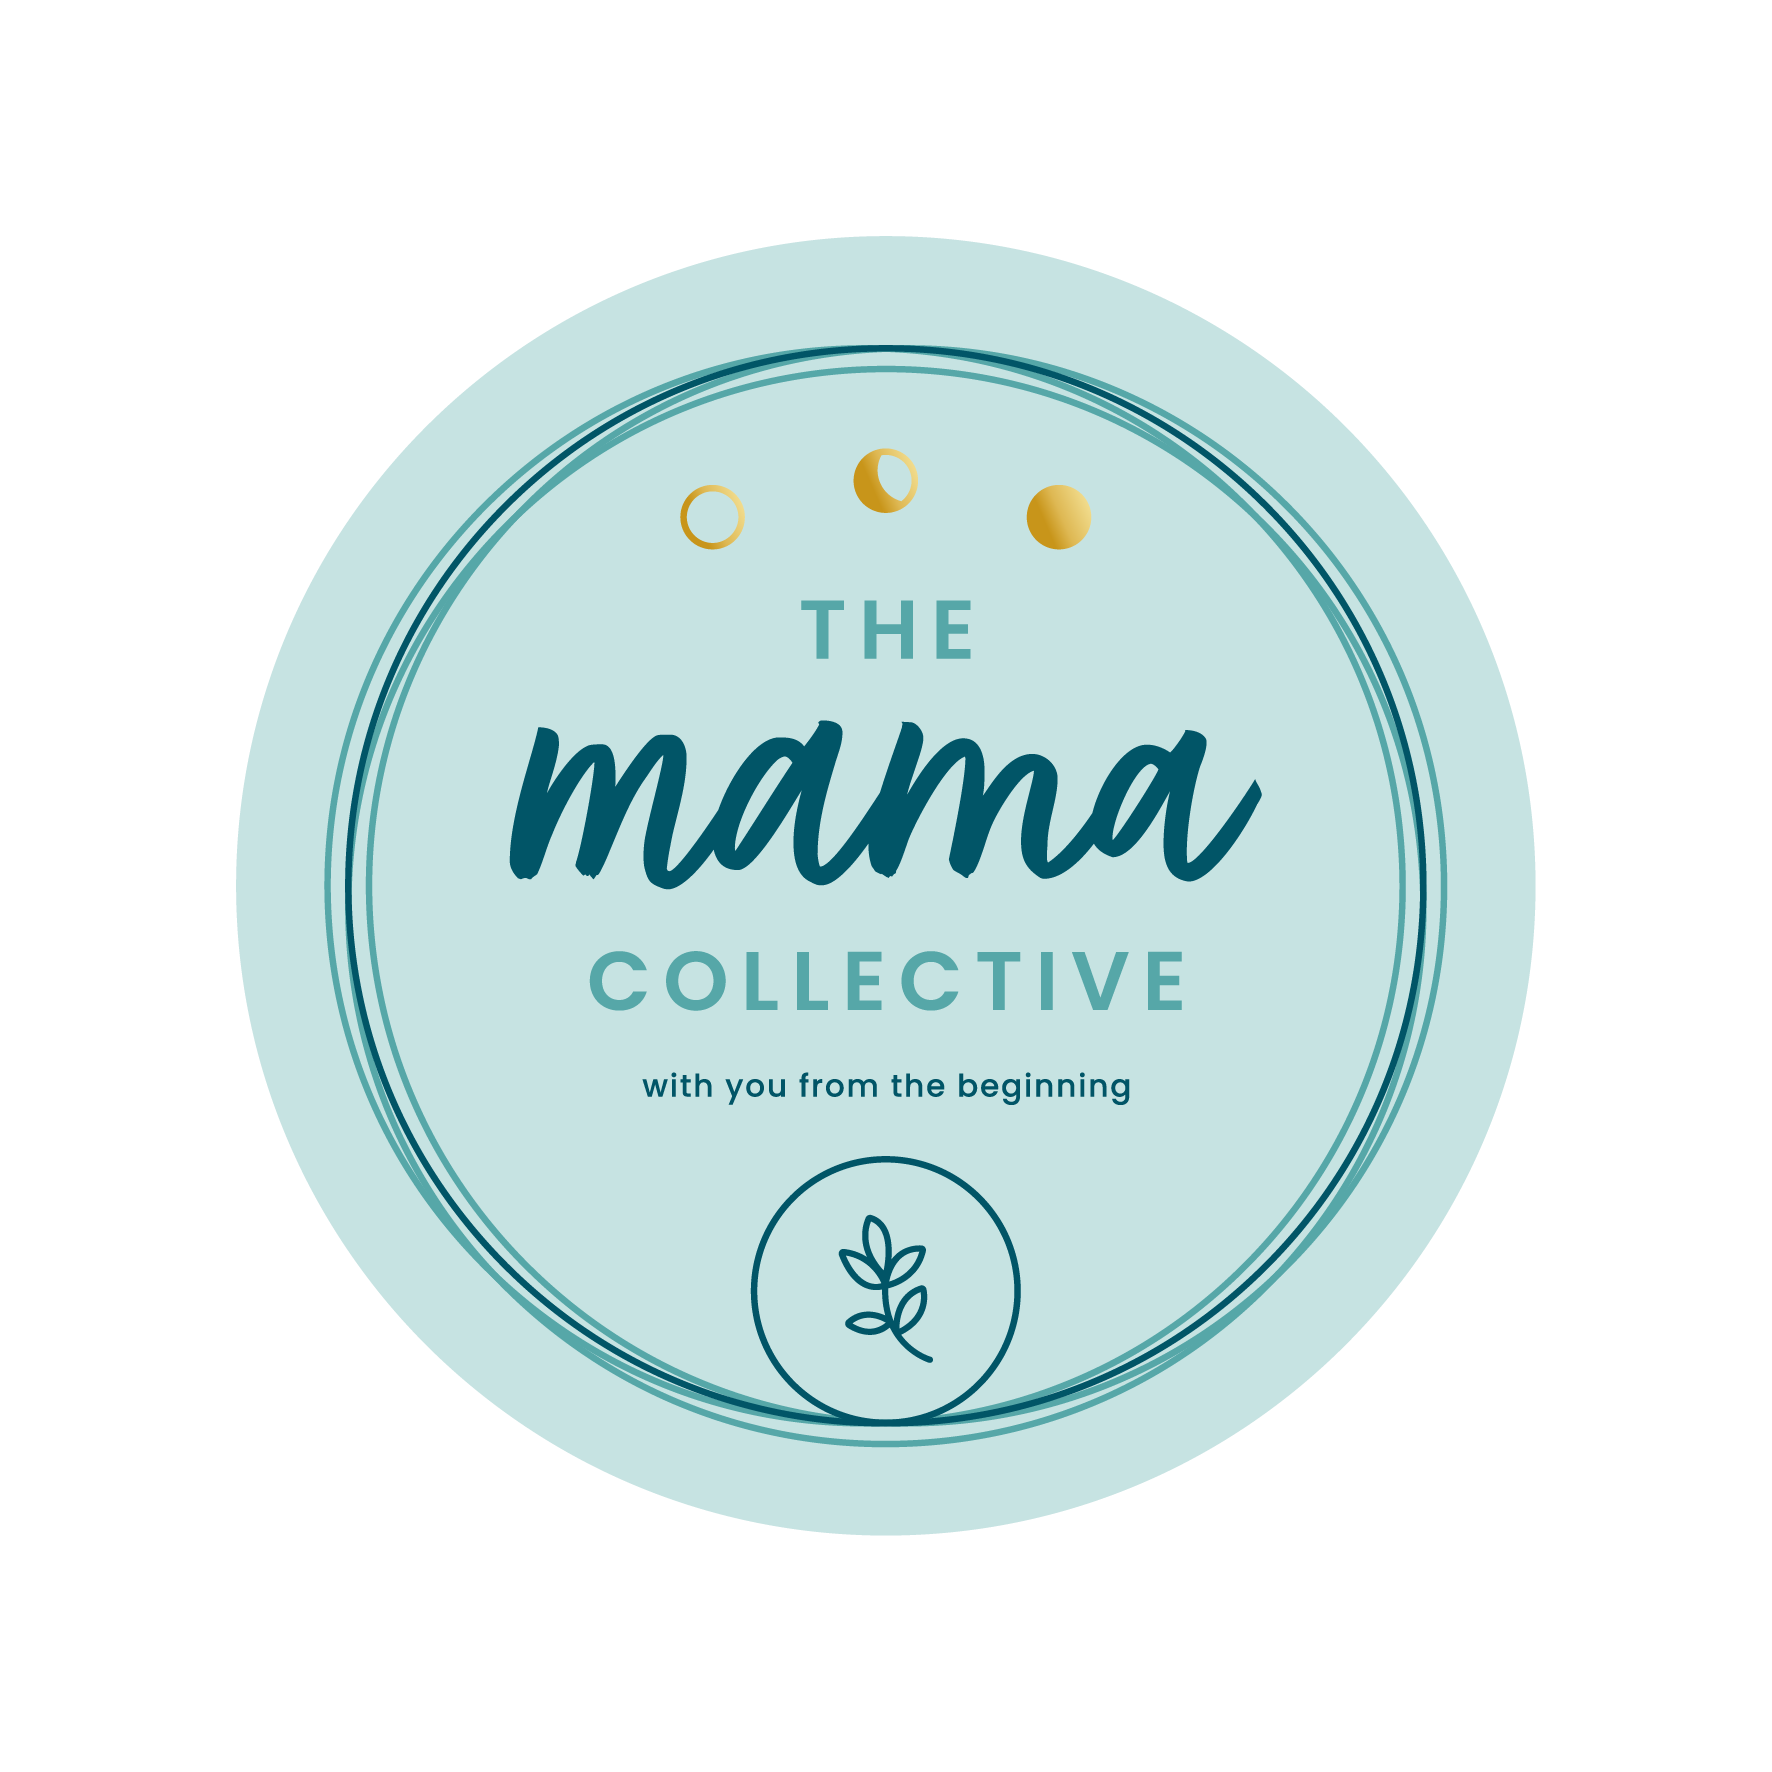 The Mama Collective